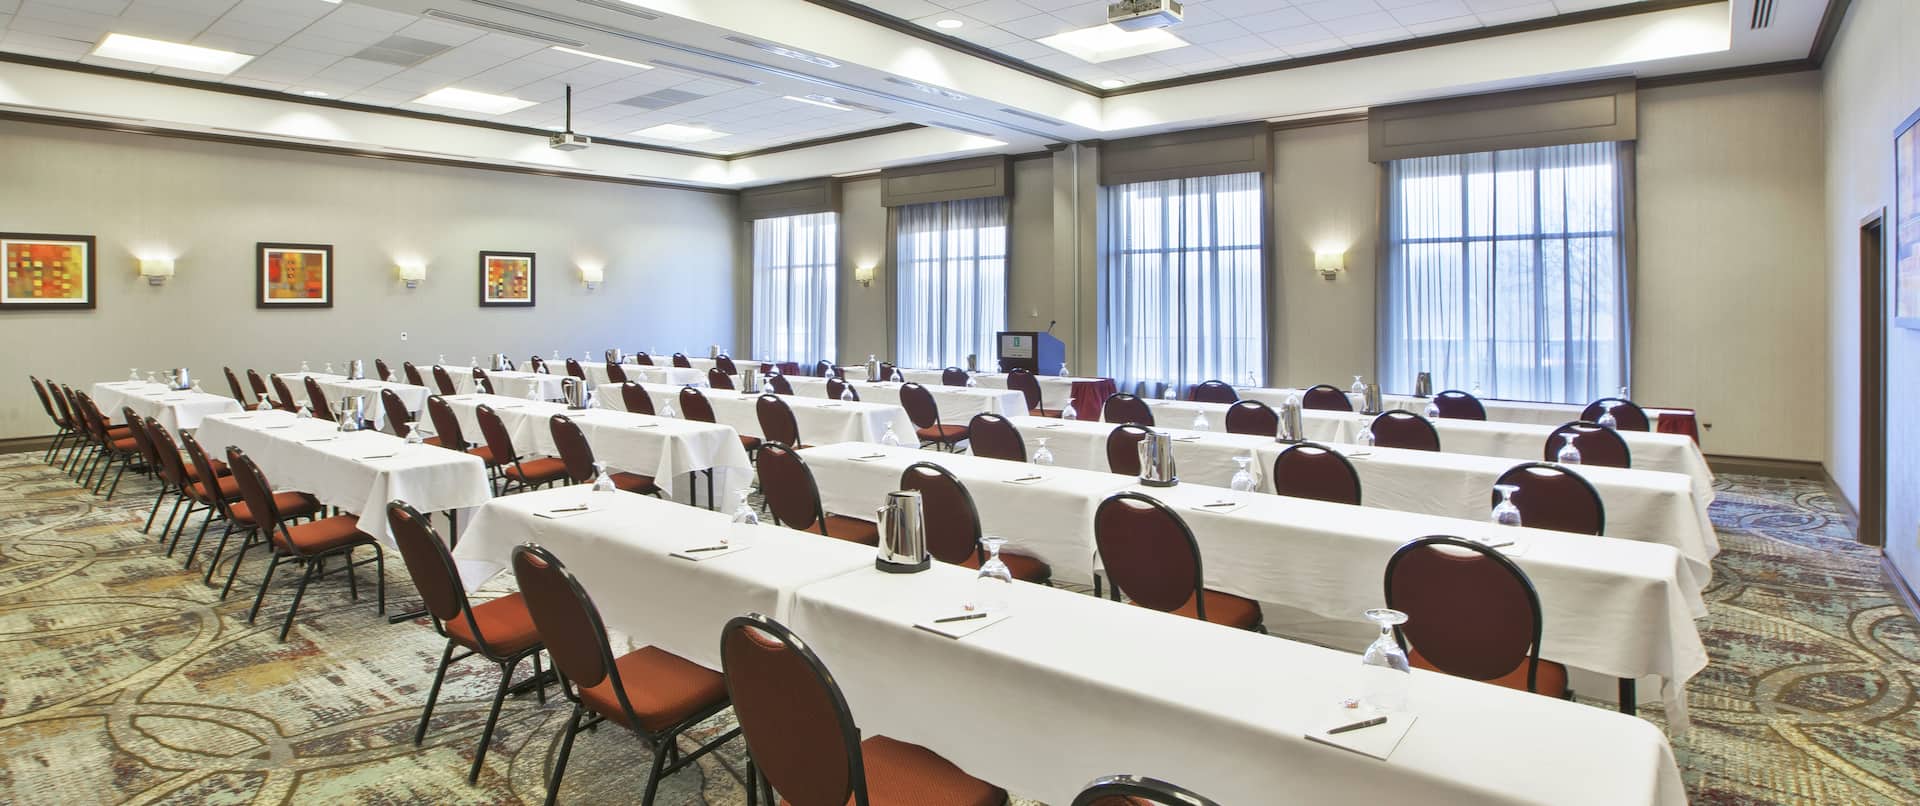 Classroom Setup in Bexley Meeting Room WIth Overhead Projectors, Tables, Chair, Podium, and Windows With Sheer Drapes